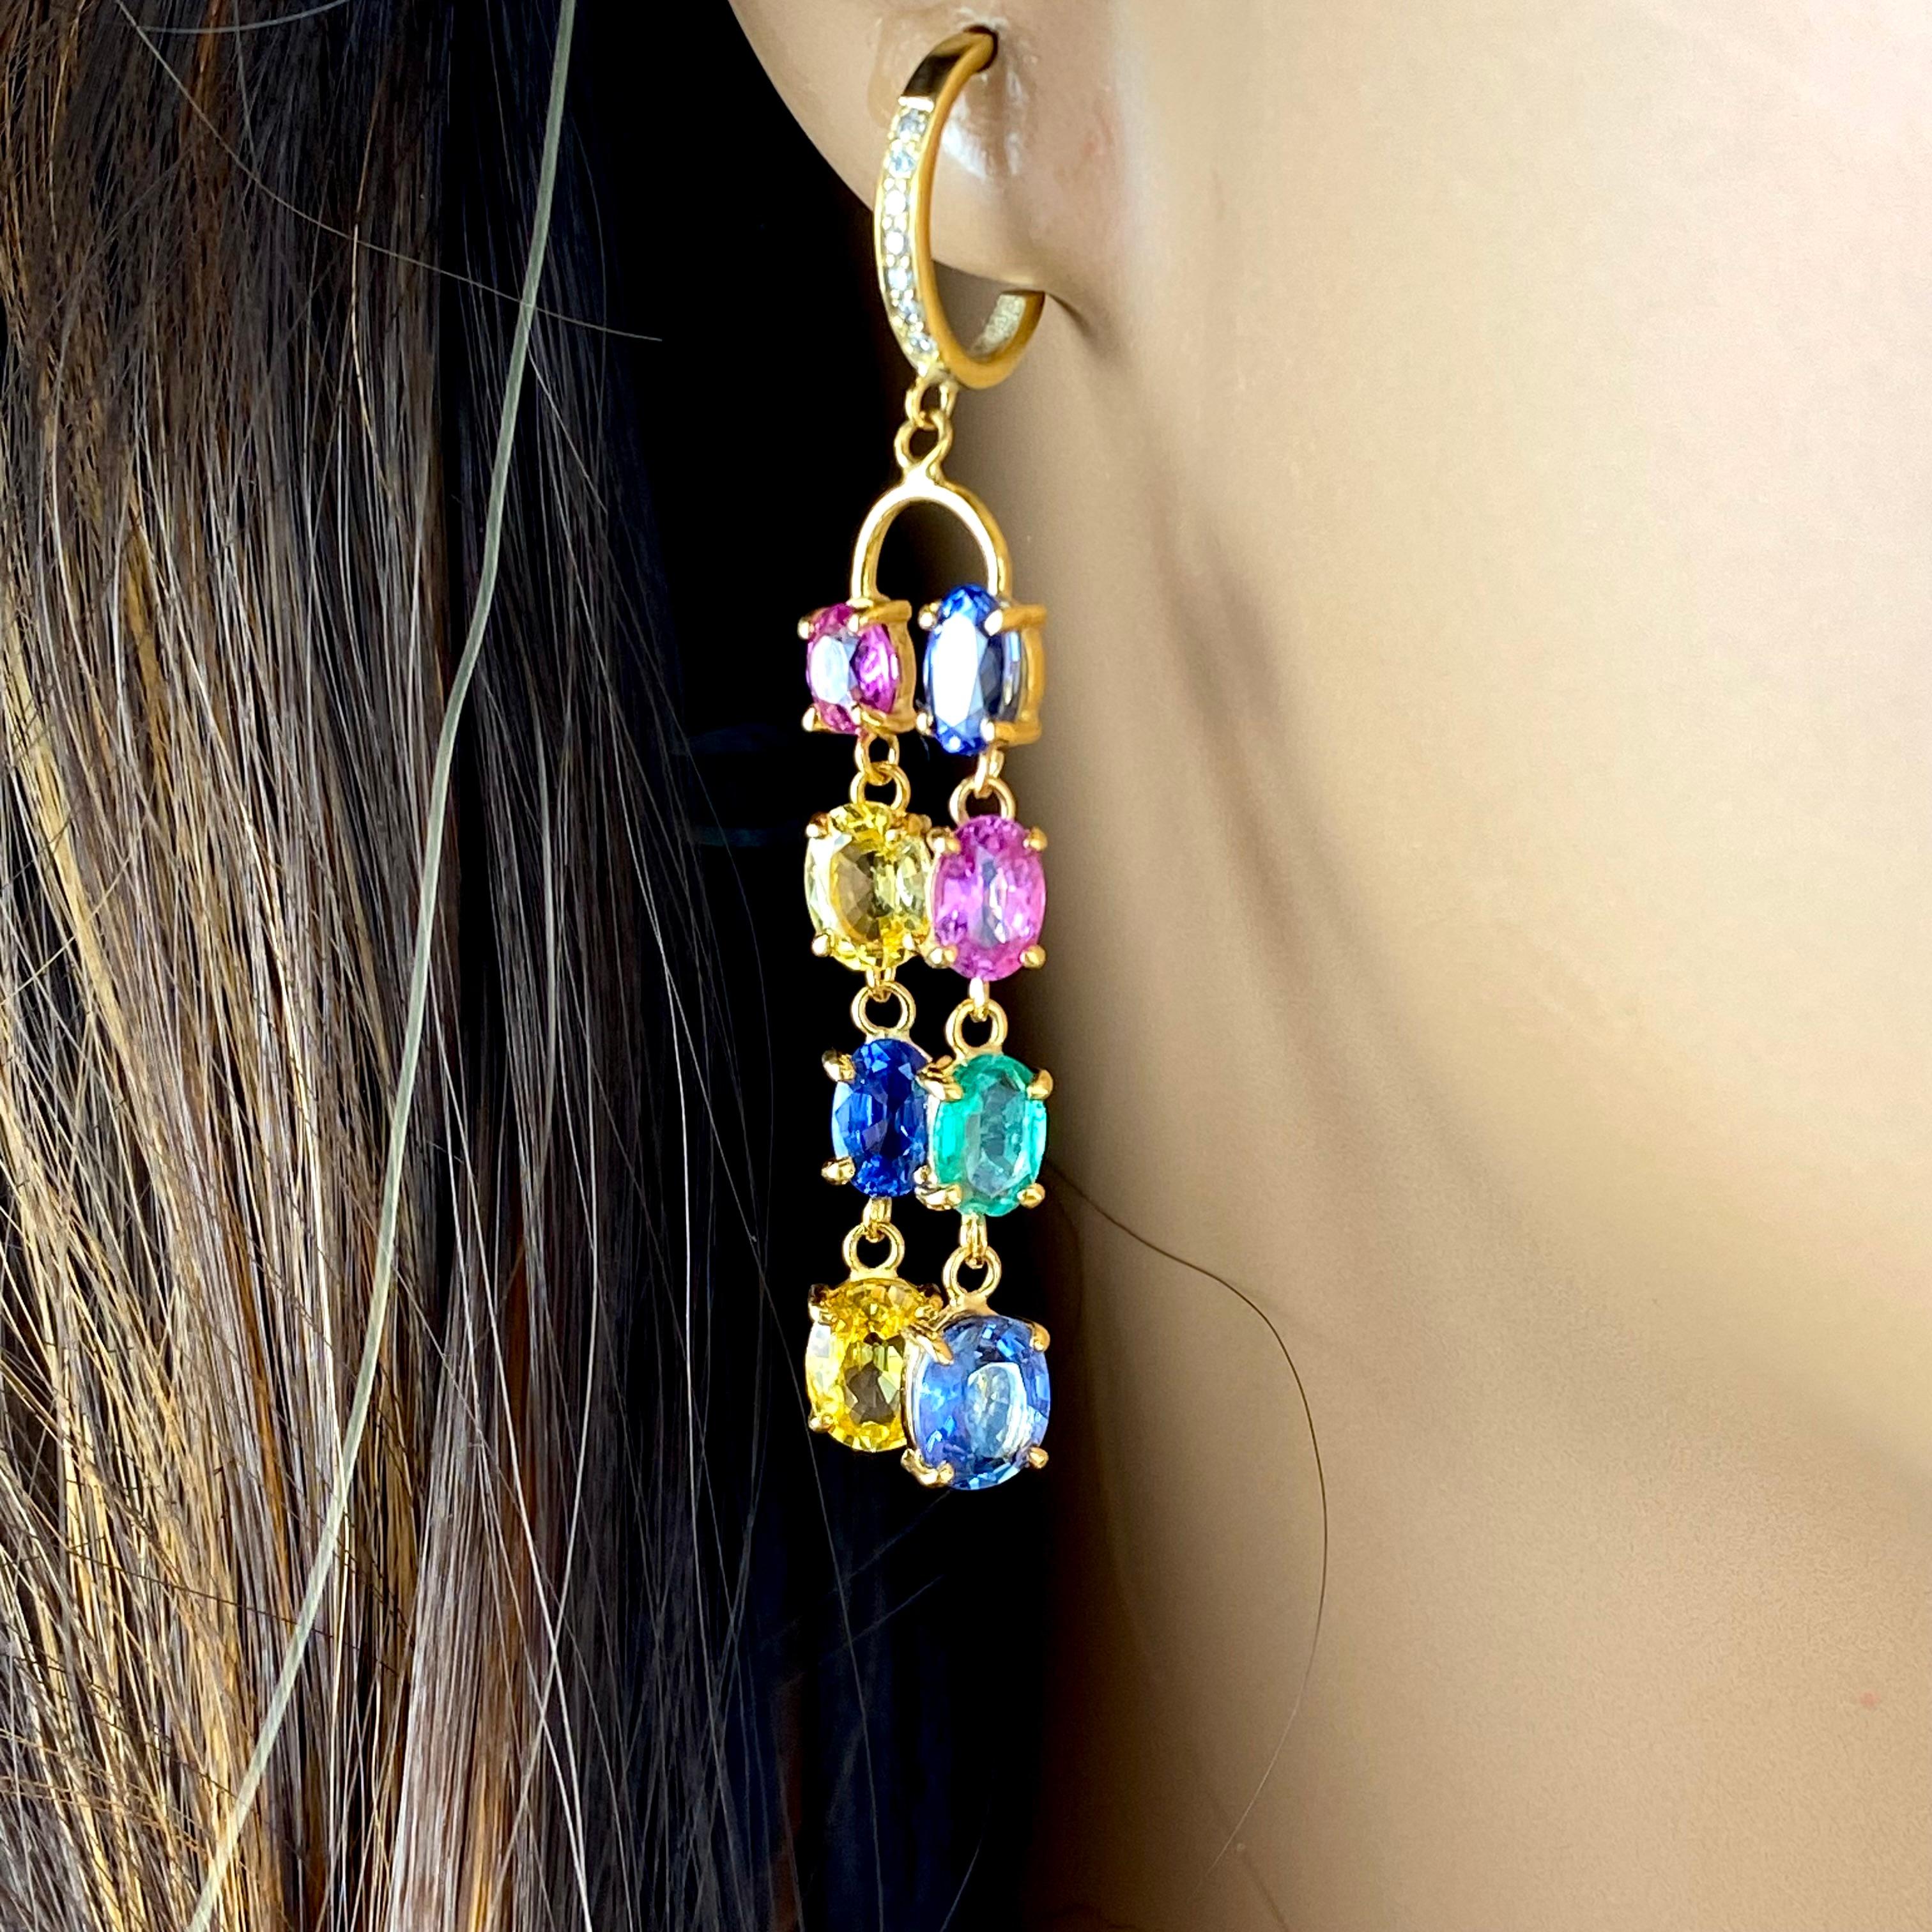 Women's Double Lined Multi-Colorful Precious Stones 11.35 Carat 2 Inch Hoop Earrings For Sale